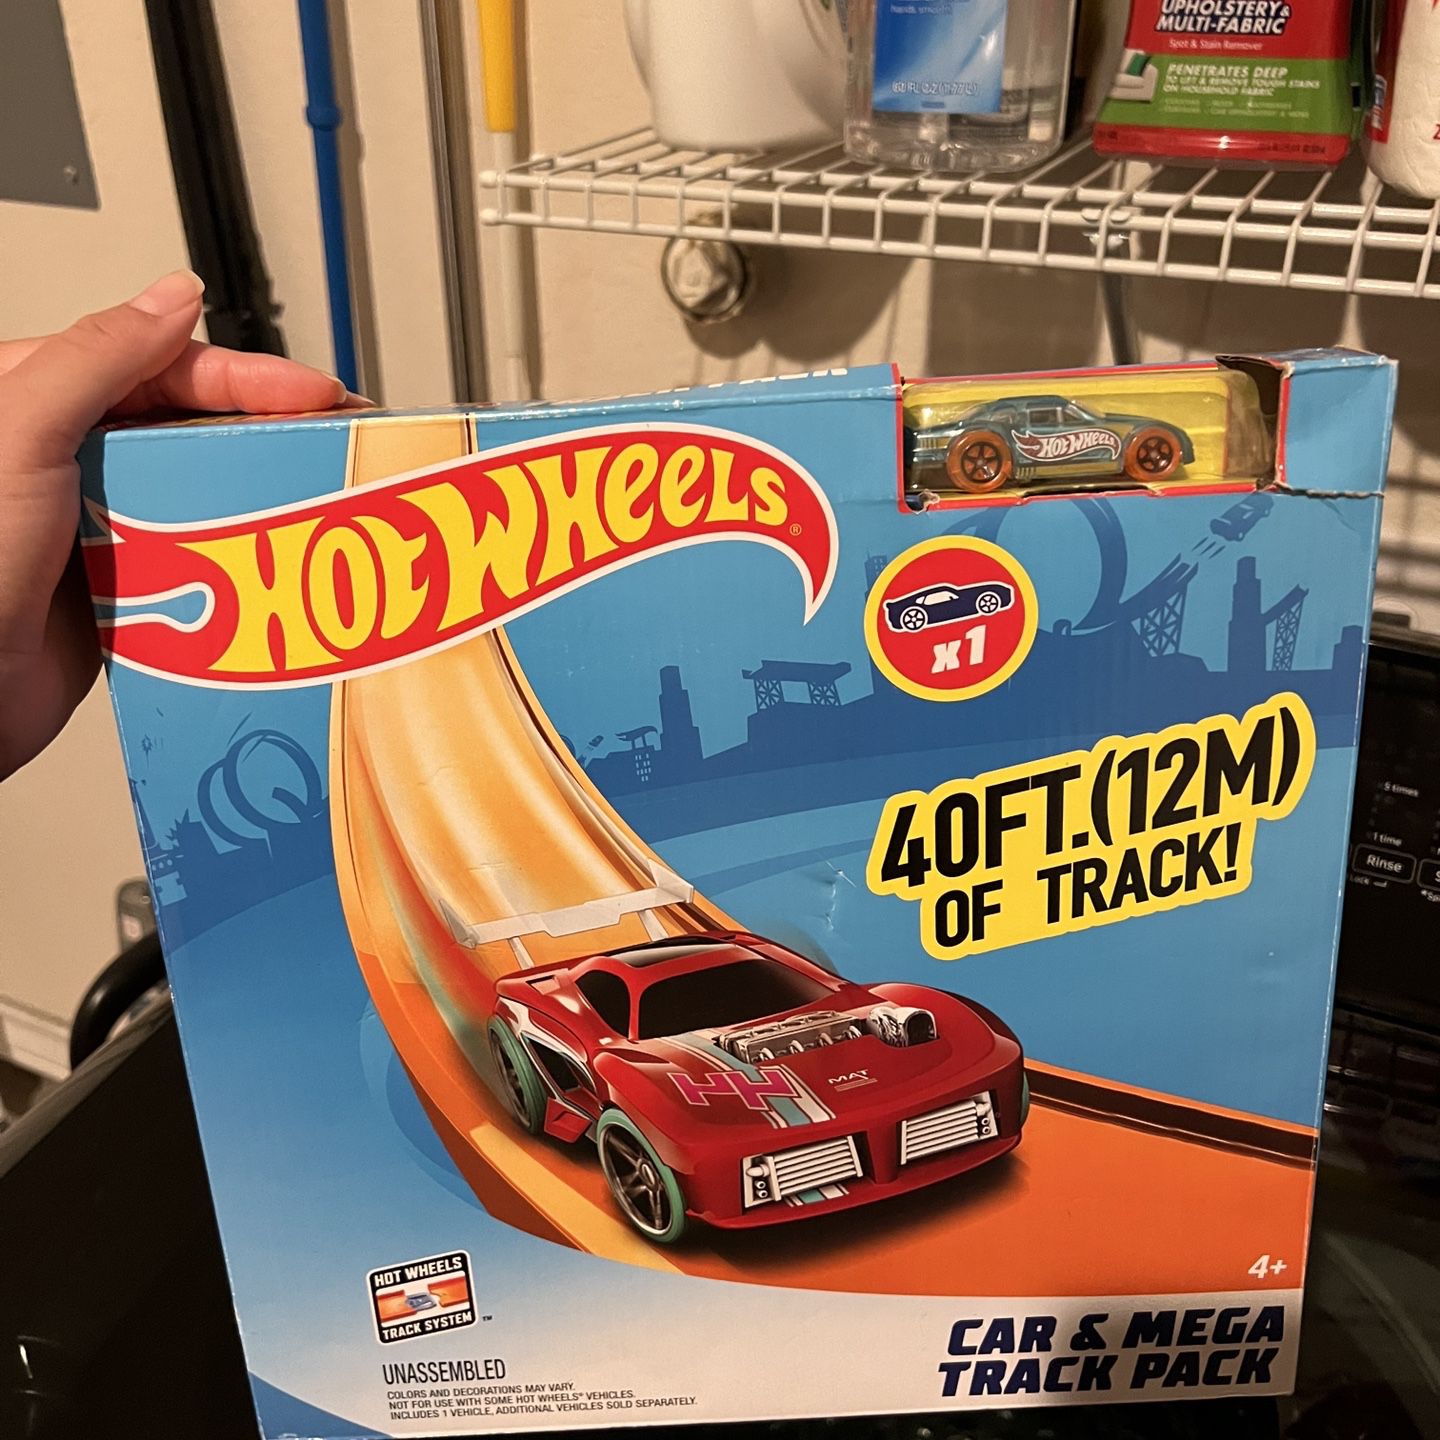  Hot Wheels Car and Mega Track Pack with 40ft of Track